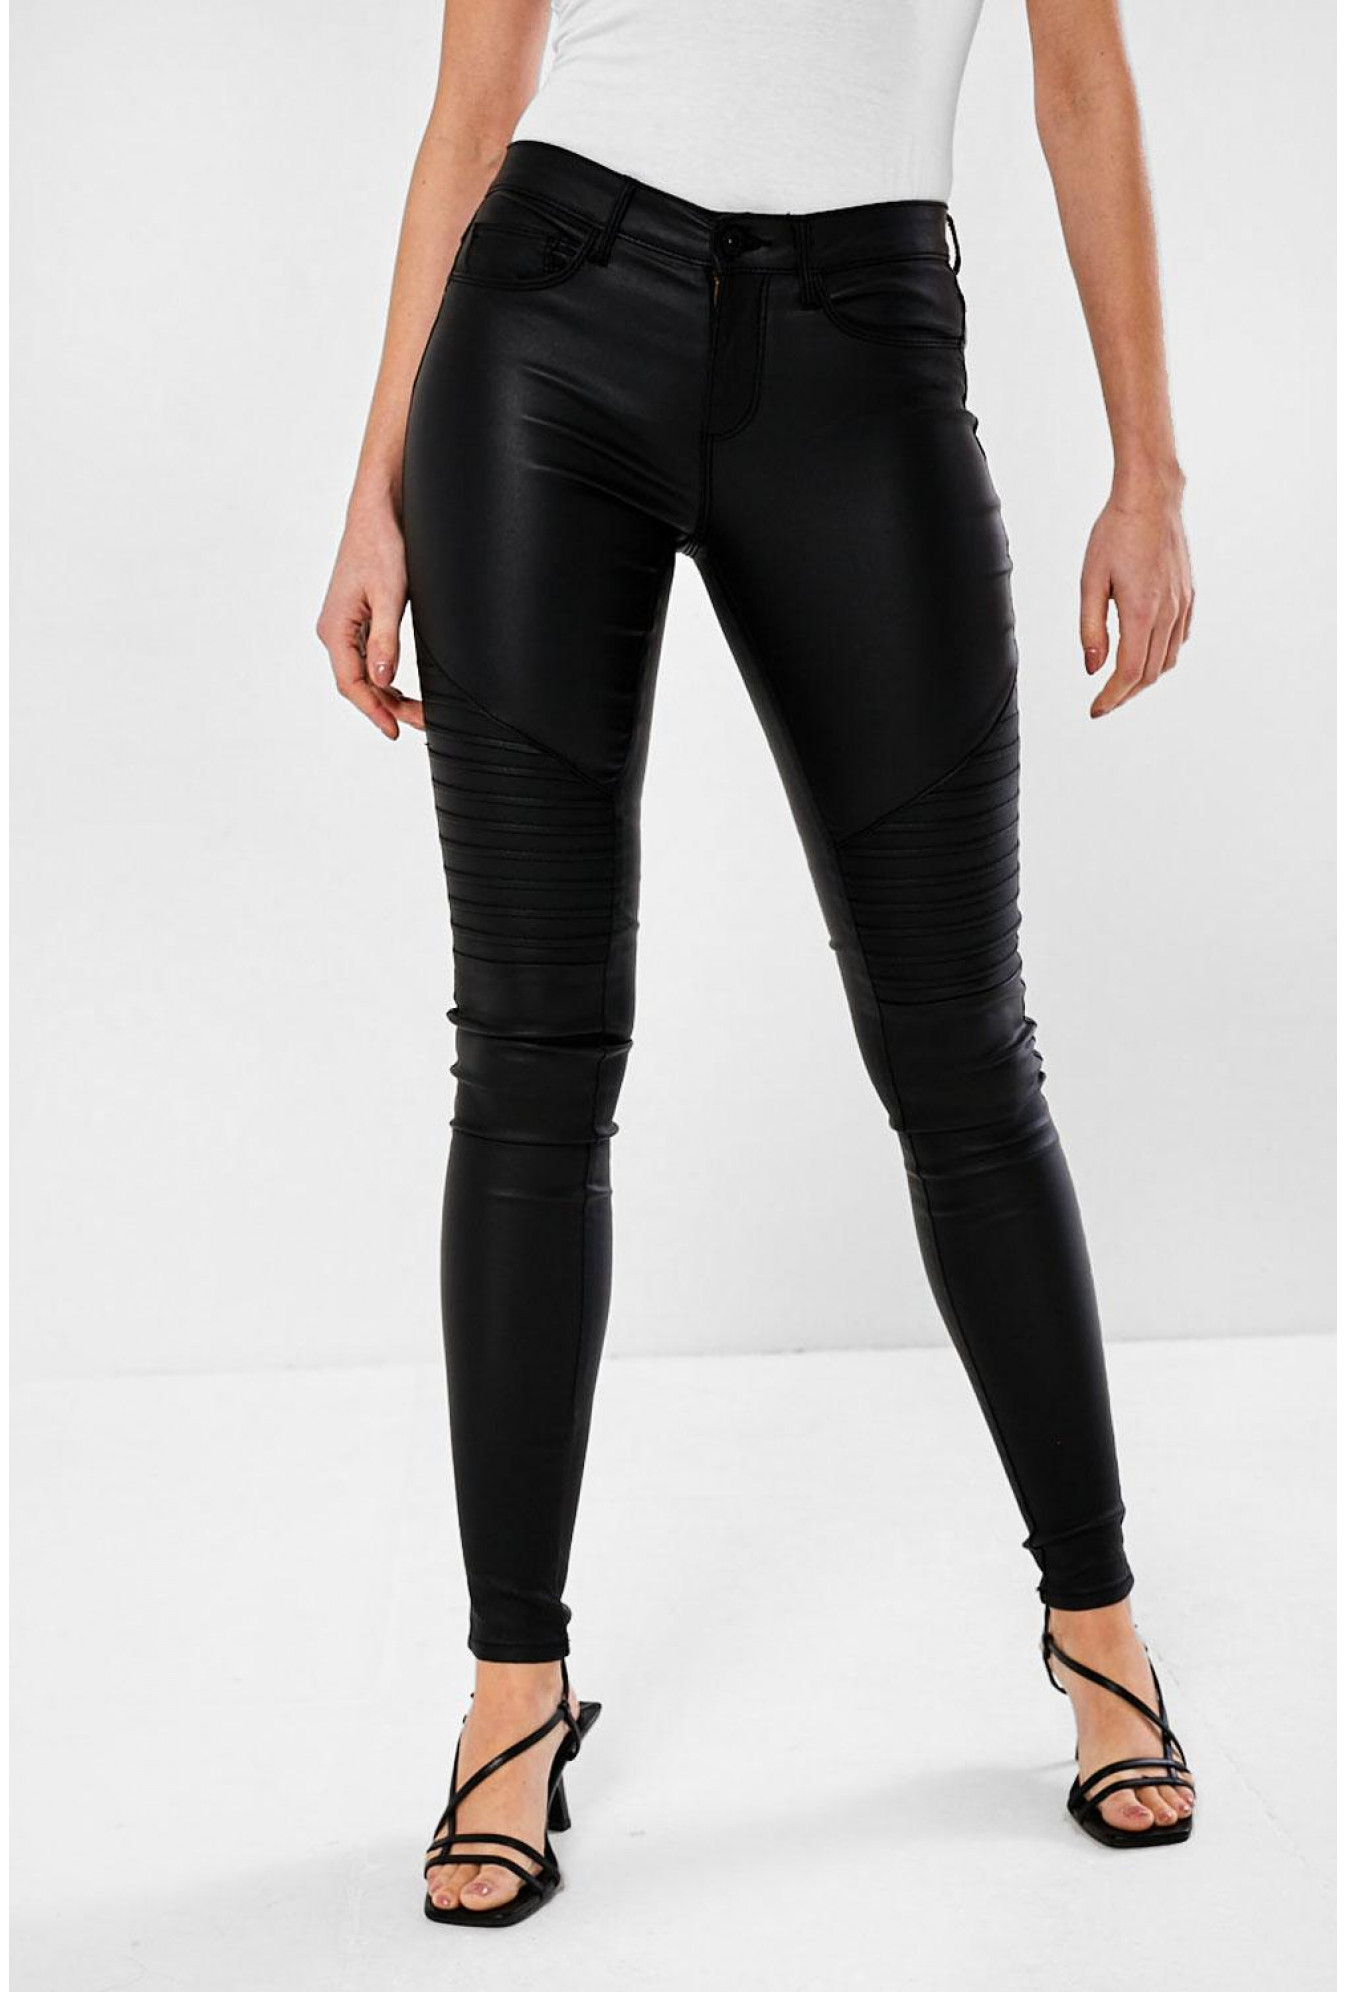 Only Royal Biker Coated Jeans in Black | iCLOTHING